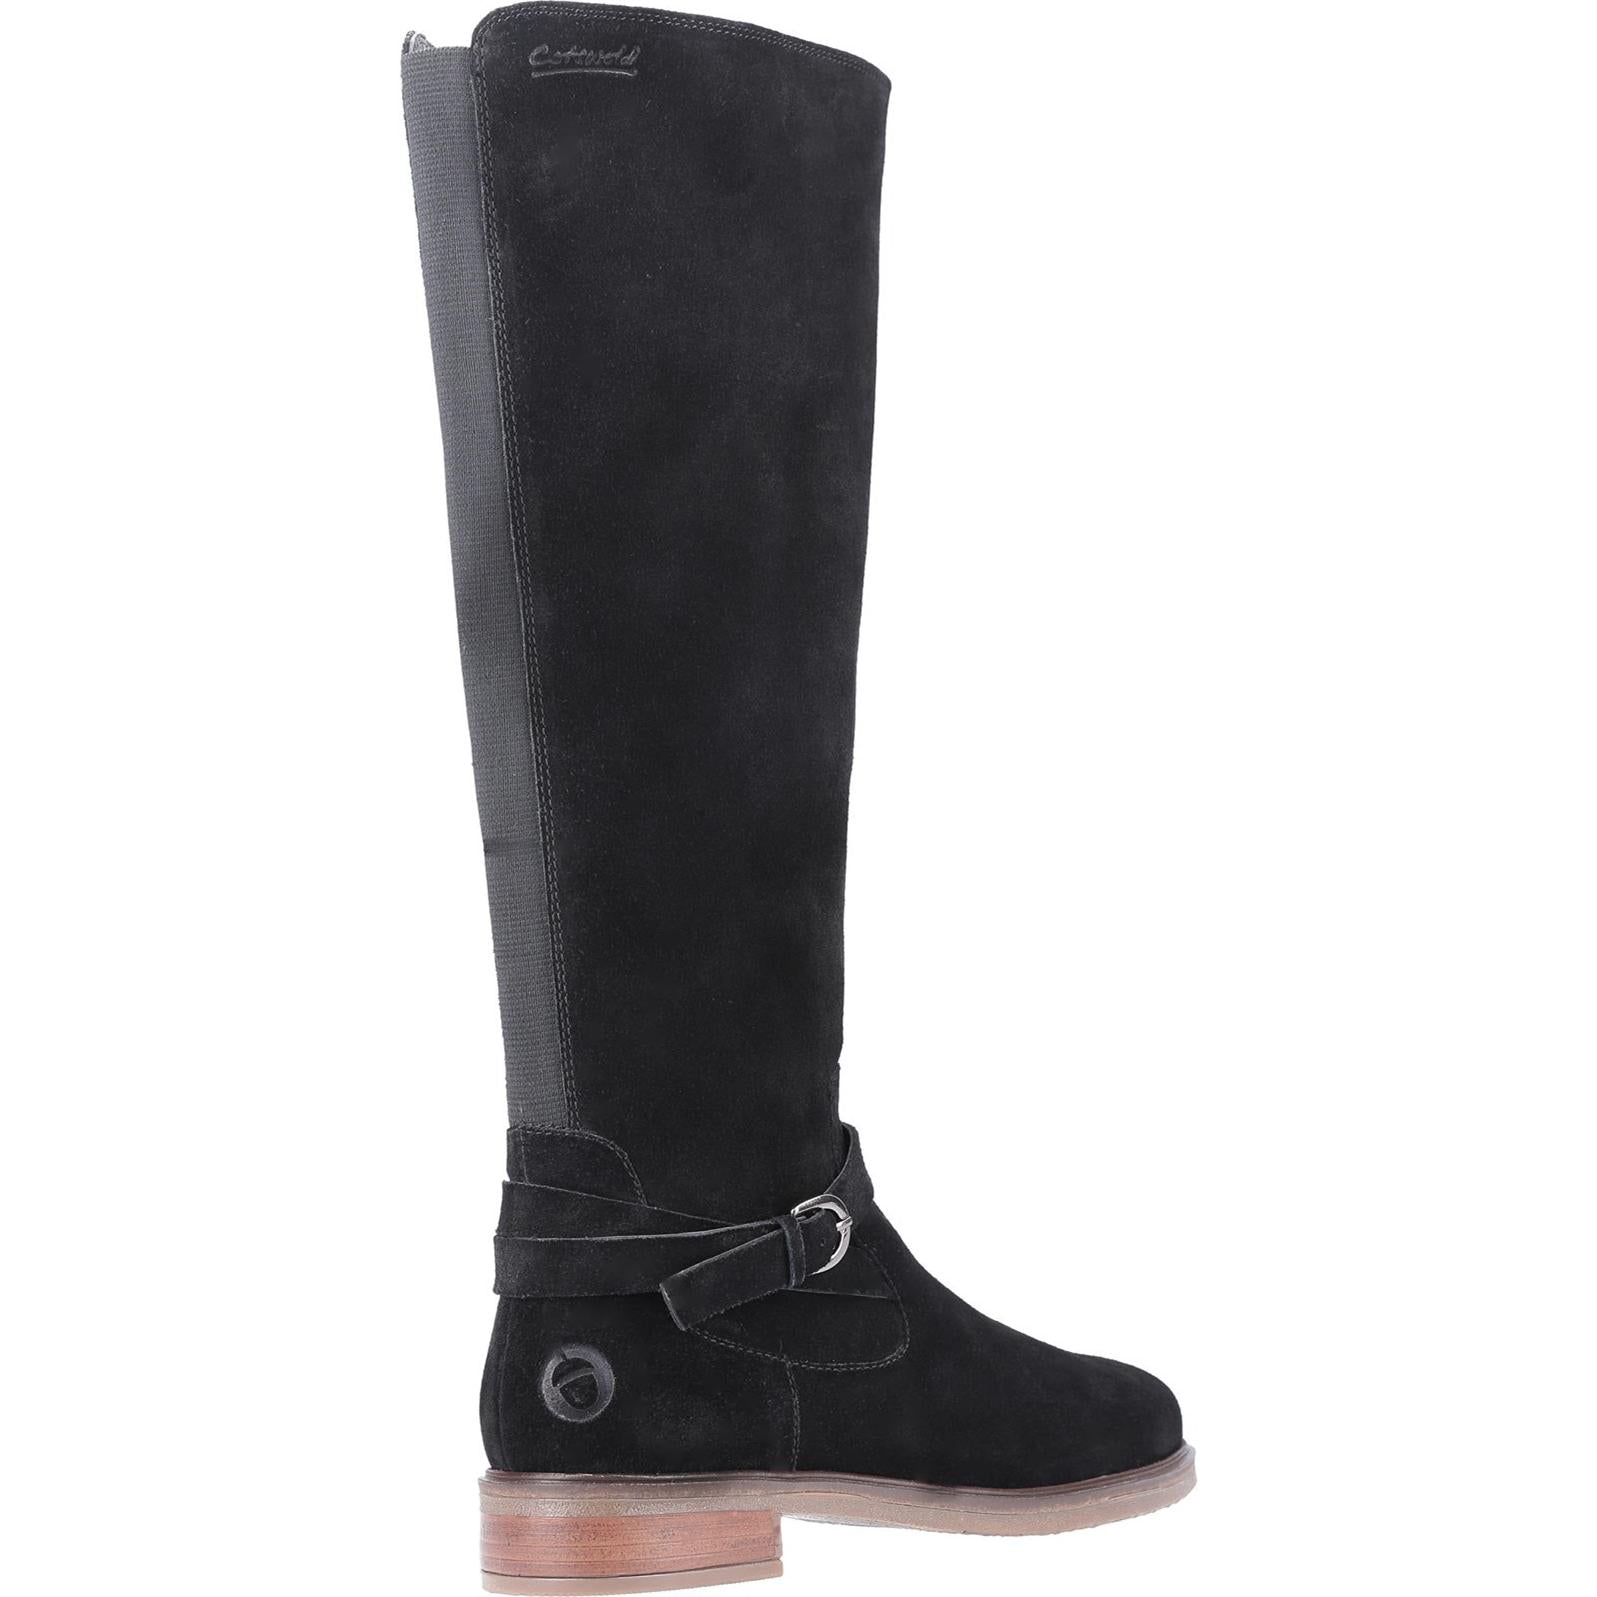 Cotswold Leafield Knee High Boots